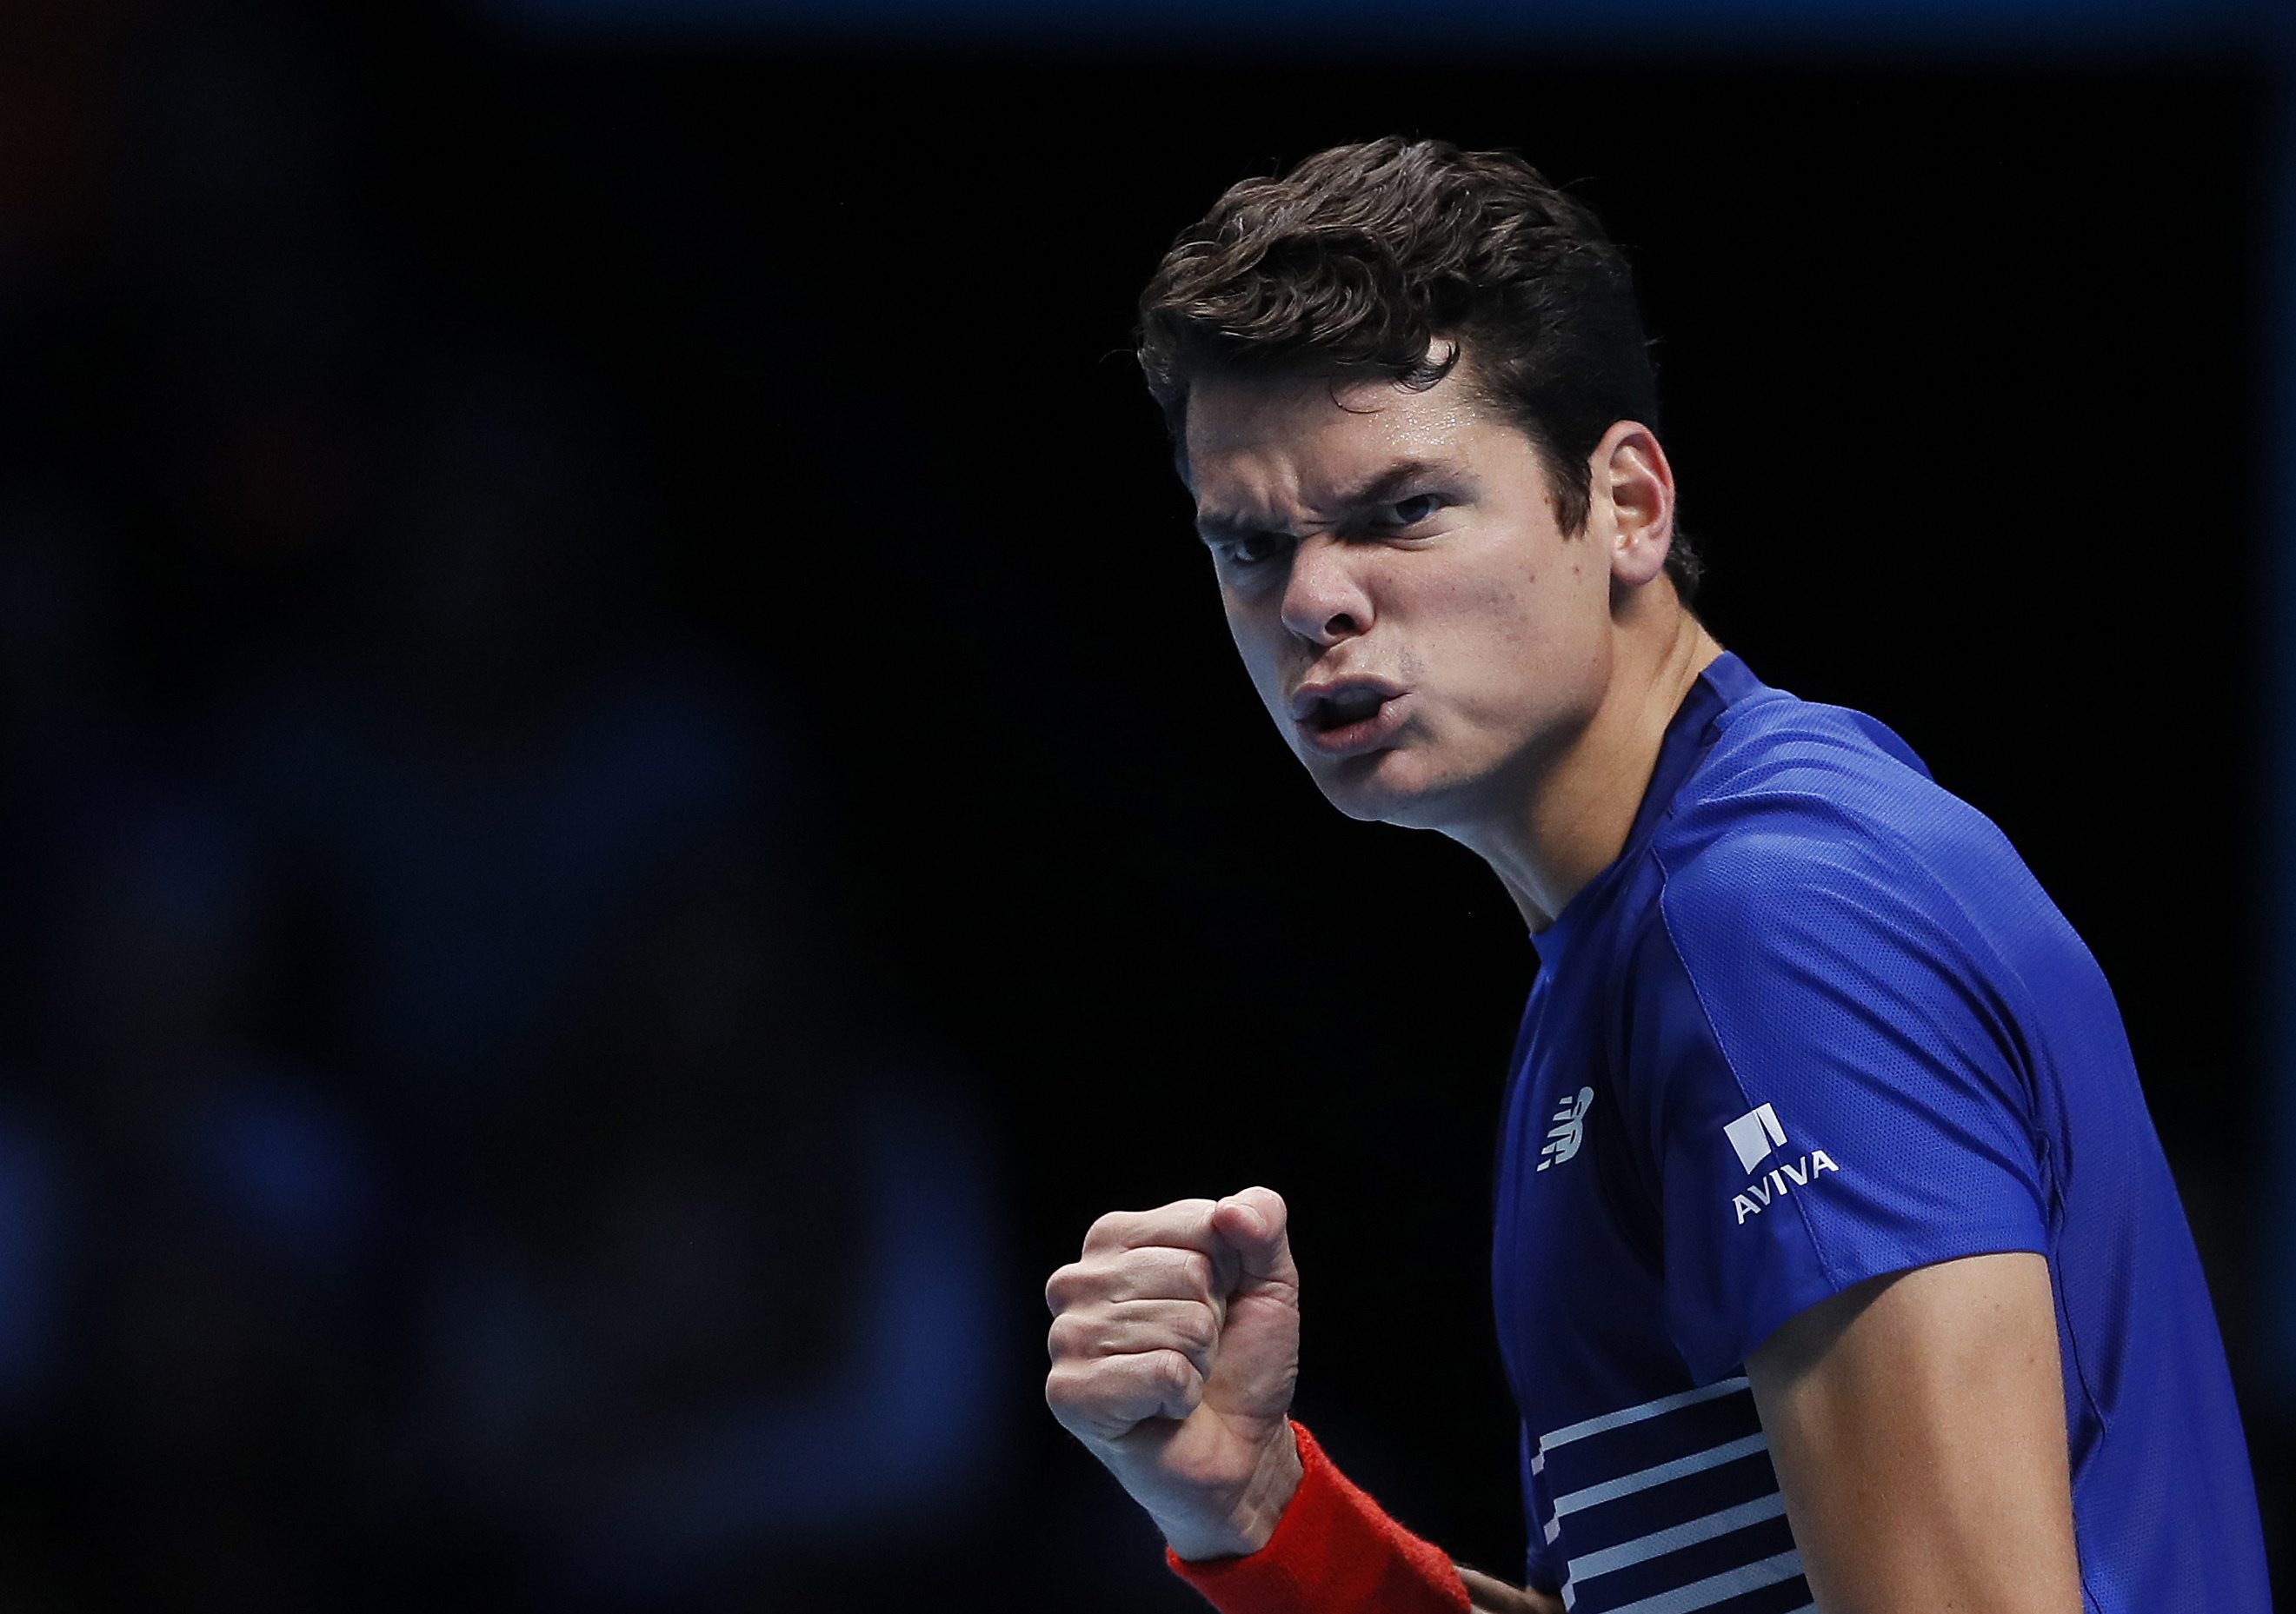 Milos Raonic of Canada celebrates winning a point after a return to Dominic Thiem of Austria during their ATP World Tour Finals singles tennis match at the O2 Arena in London, Thursday, Nov. 17, 2016. (AP Photo/Kirsty Wigglesworth)